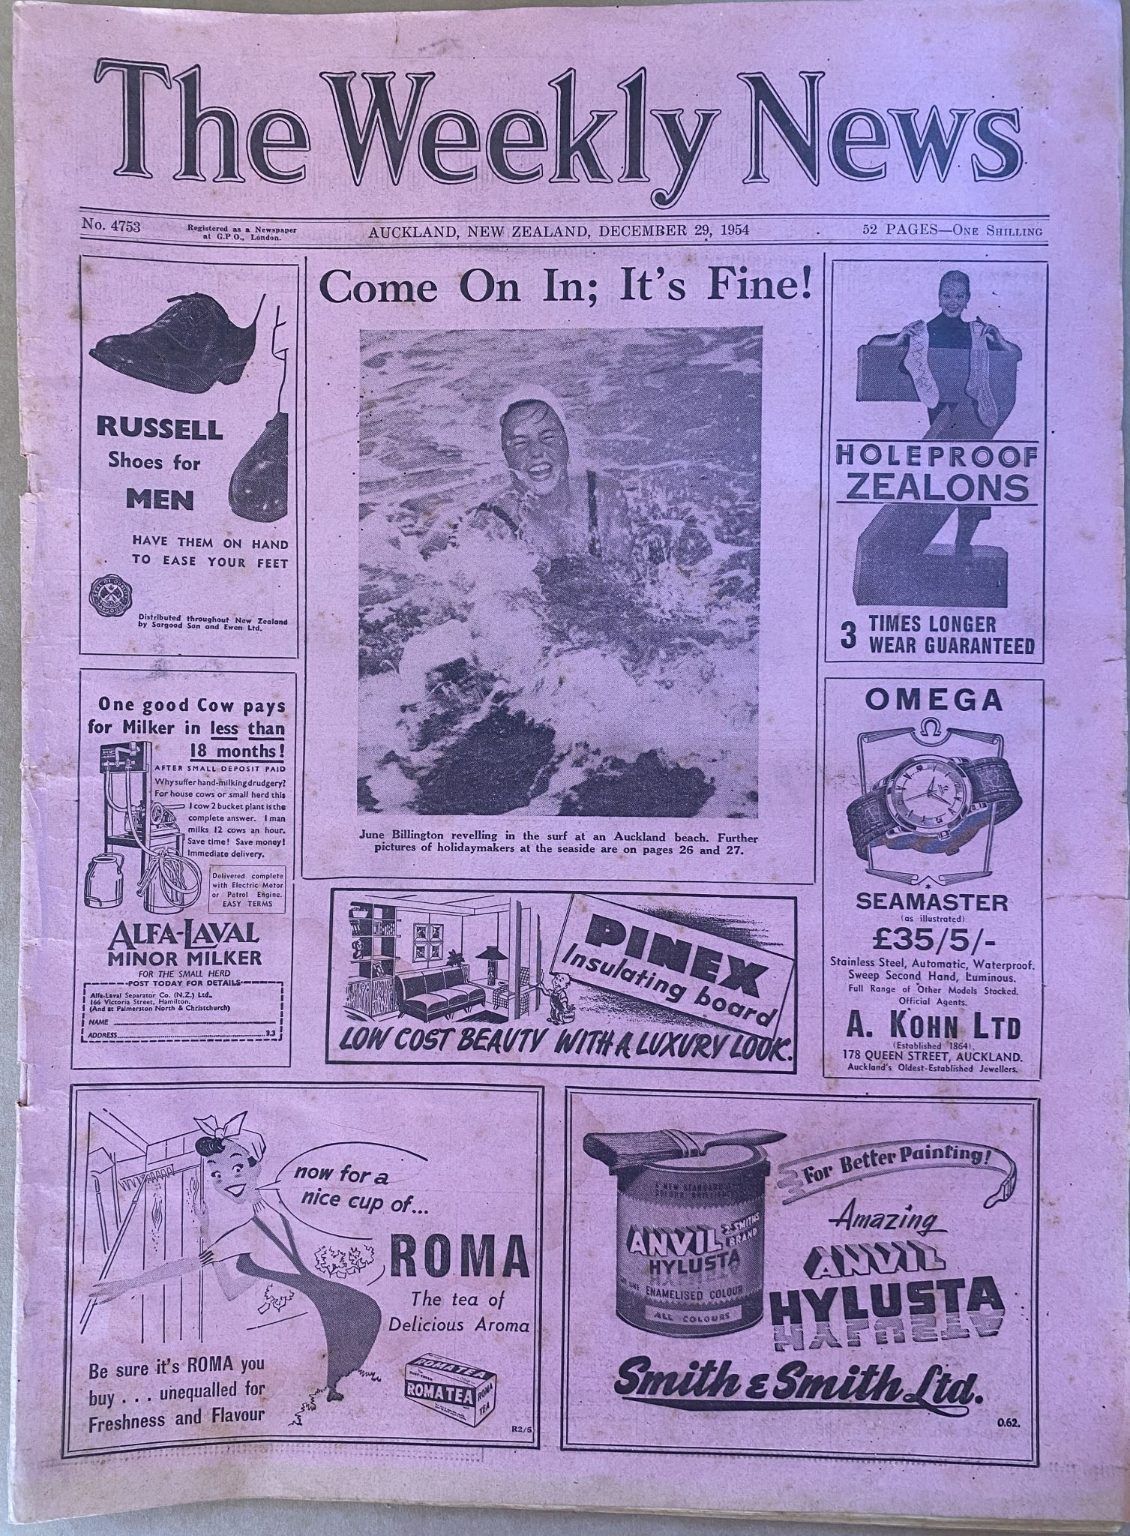 OLD NEWSPAPER: The Weekly News - No. 4753, 29 December 1954